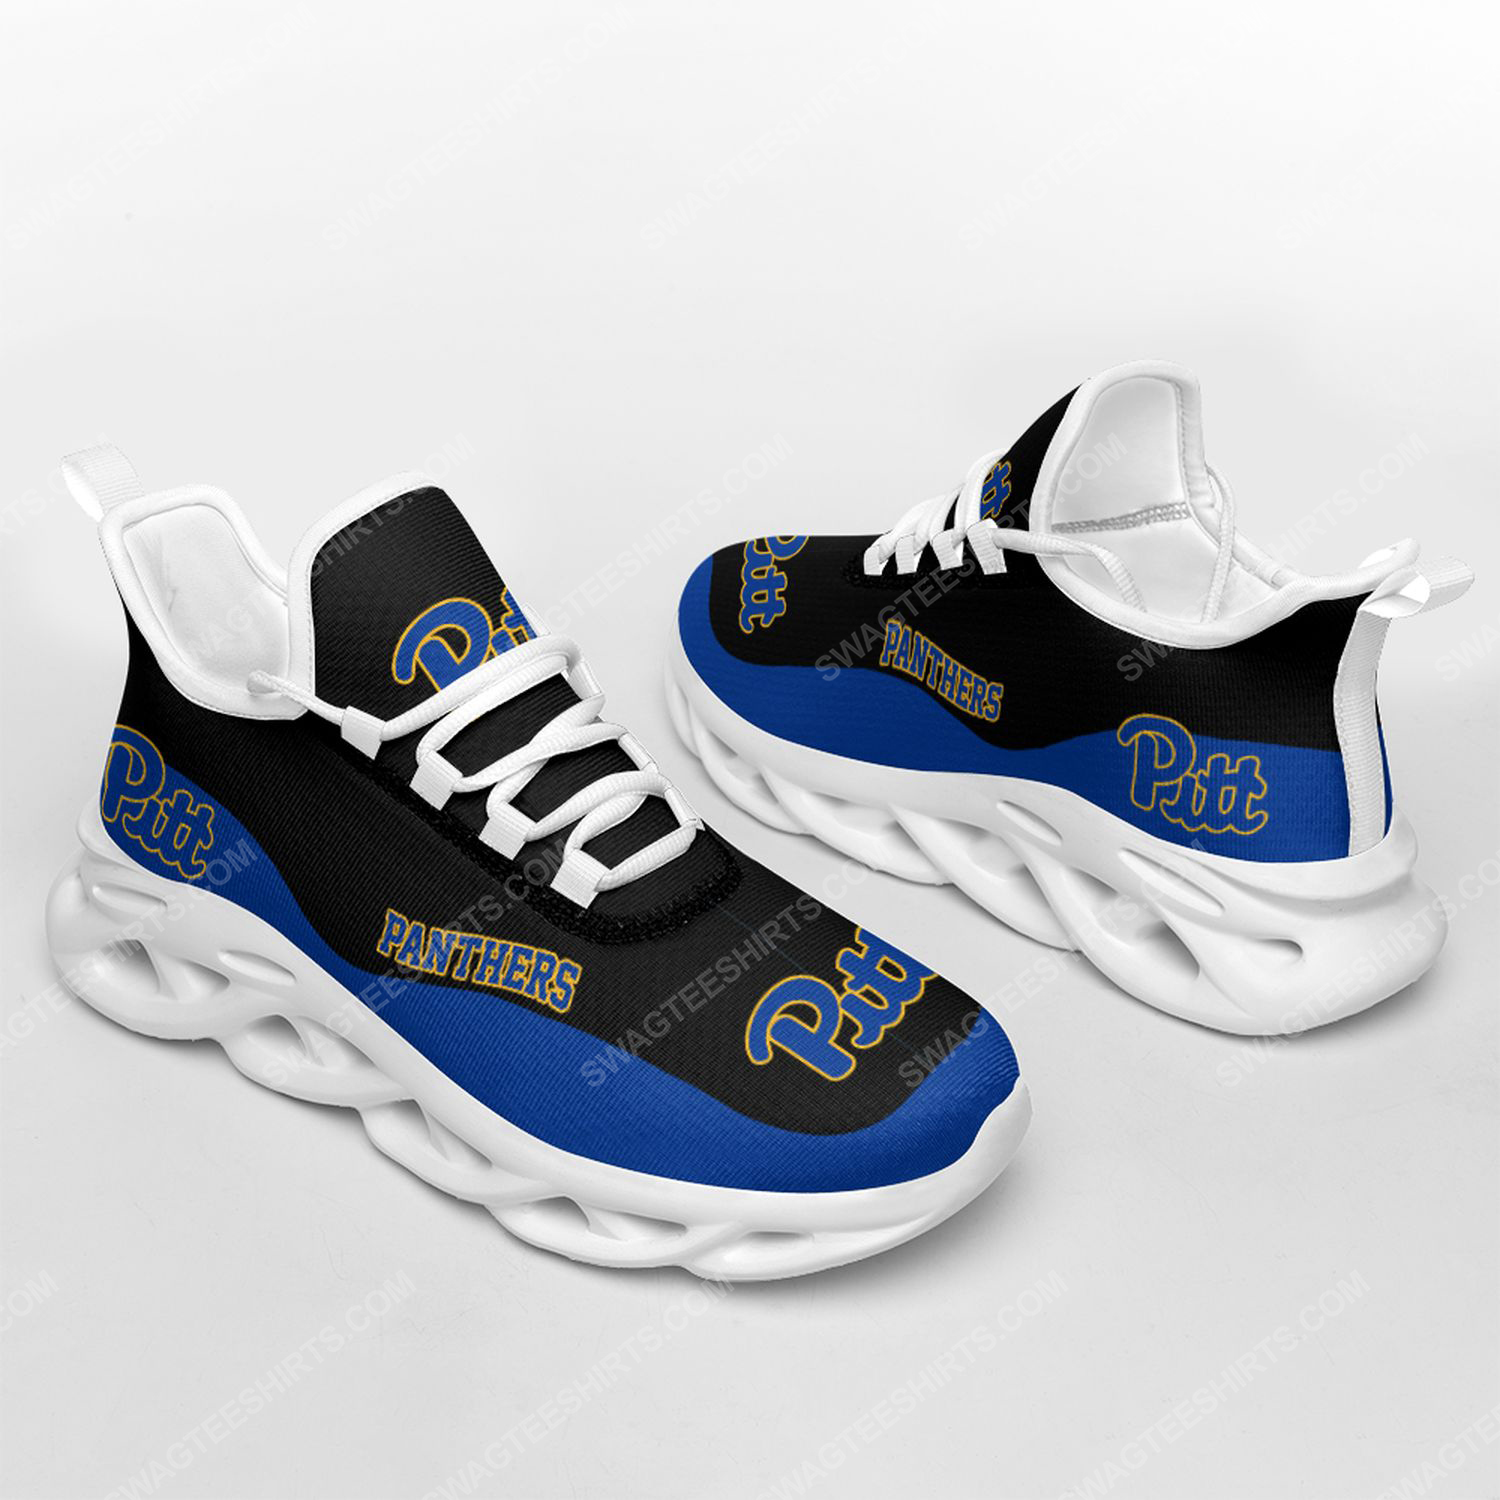 [special edition] Pittsburgh panthers football team max soul shoes – Maria